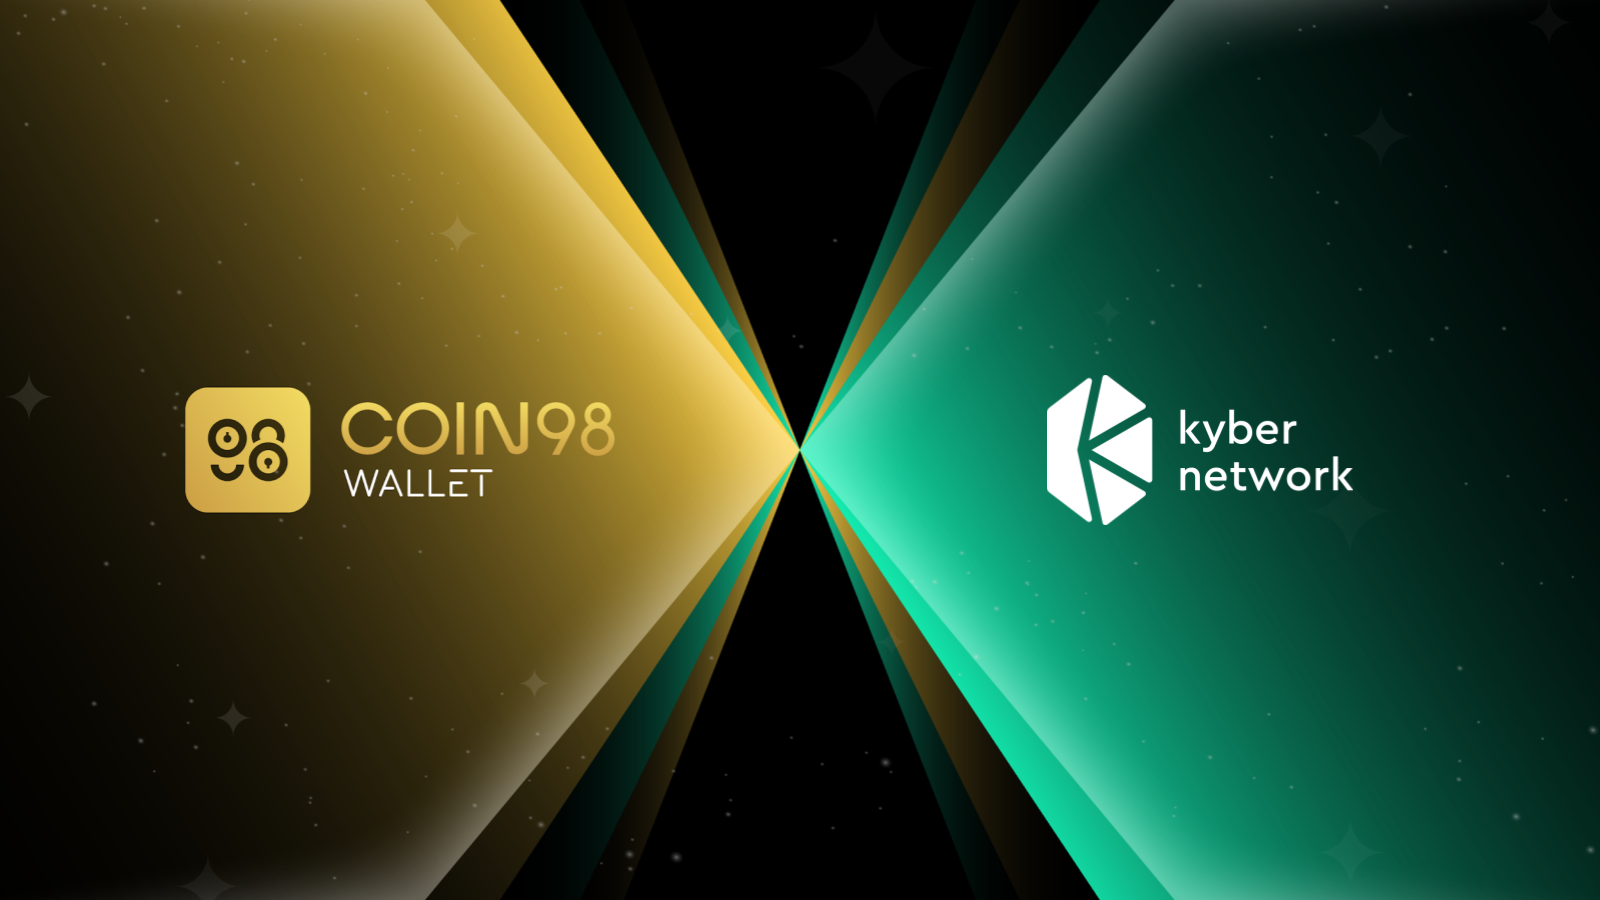 Coin98 Wallet integrates with Kyber Network, supporting Kyber DMM to enhance DeFi trading experience